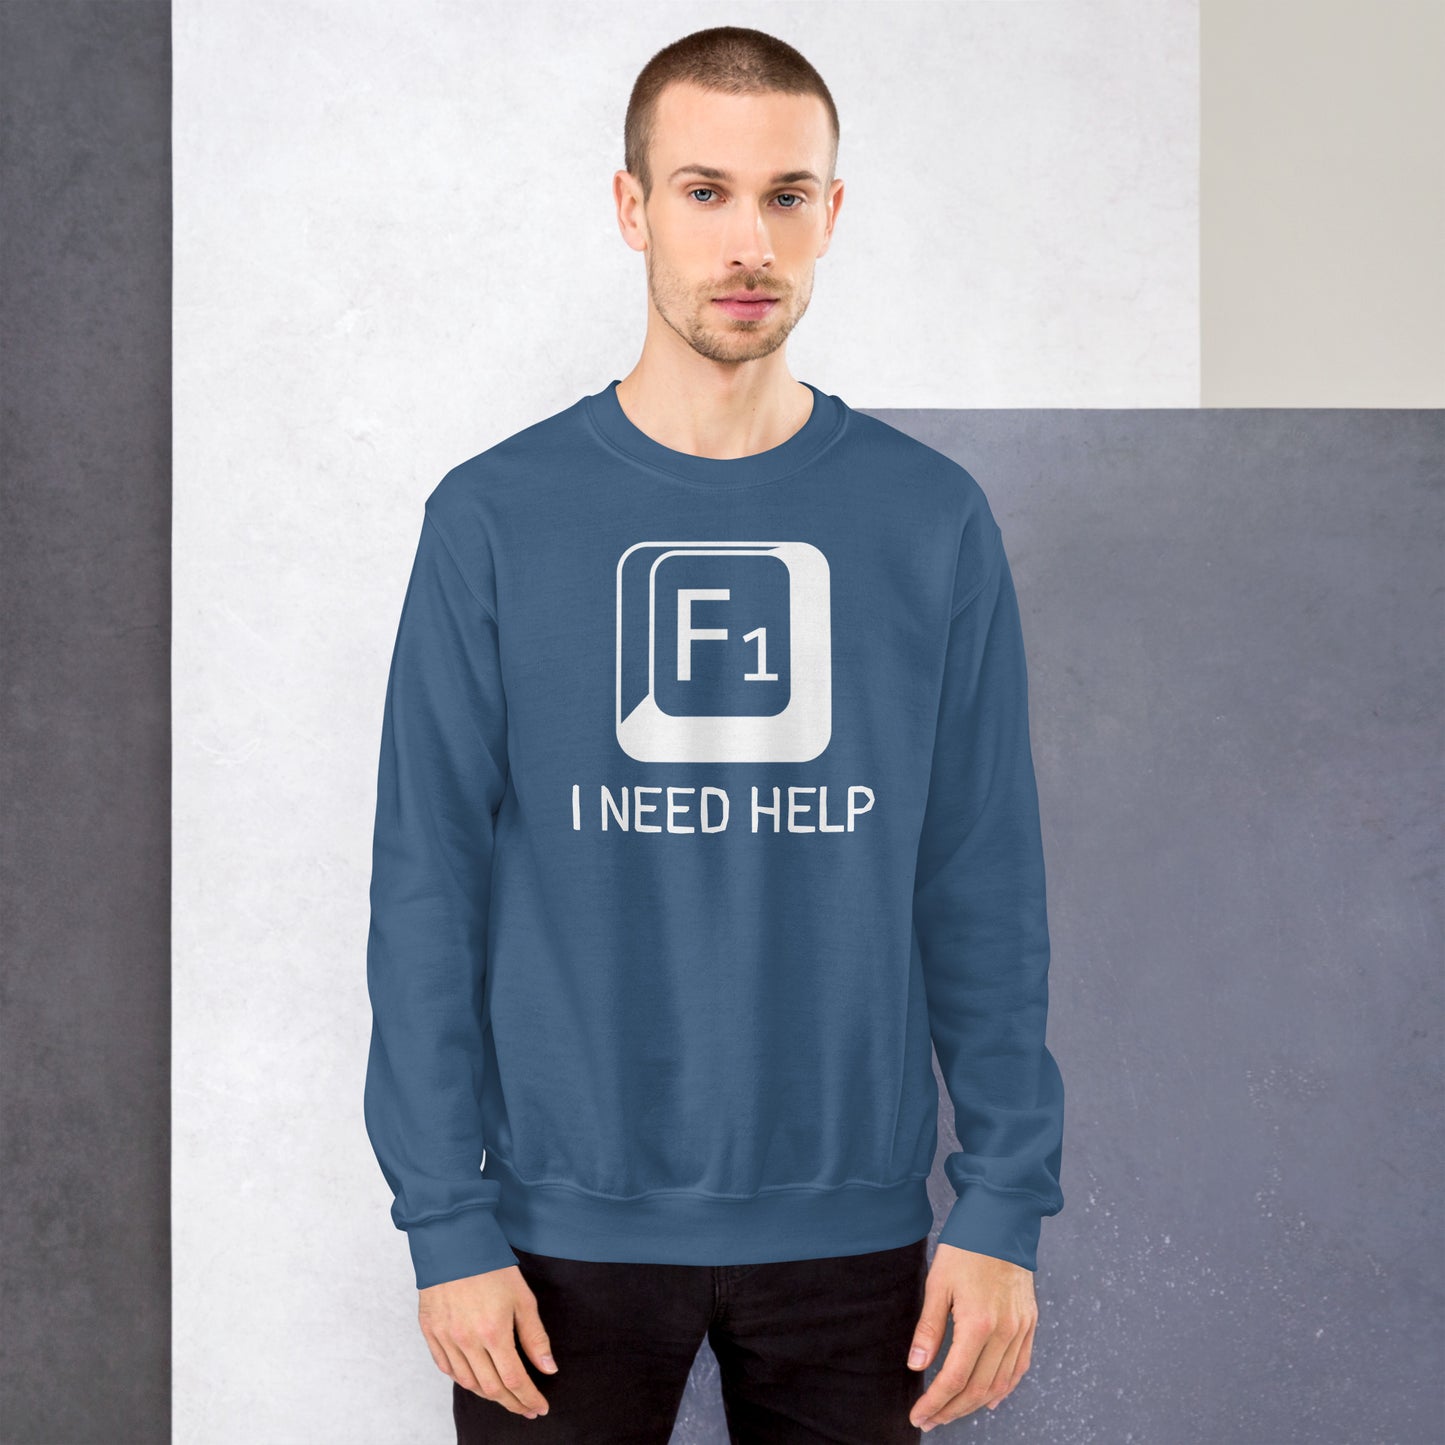 Men with indigo blue sweatshirt and a picture of F1 key with text "I need help"